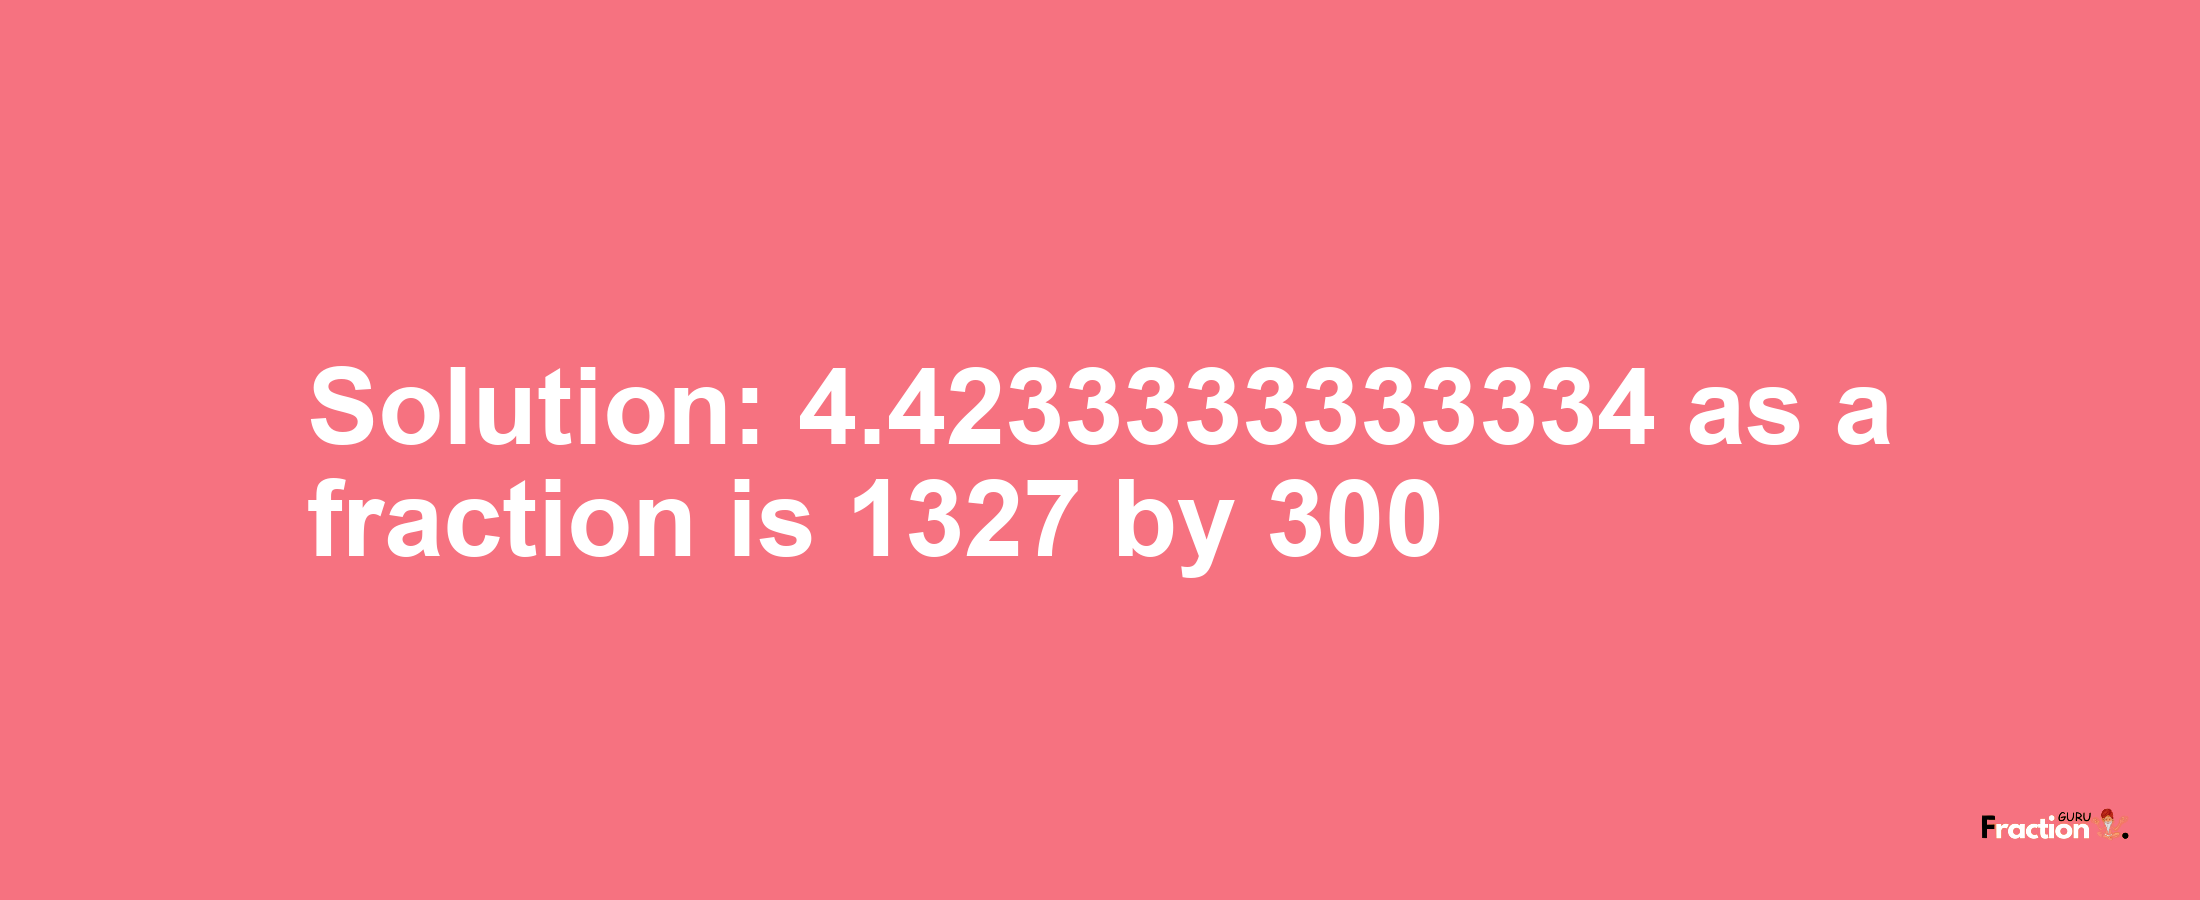 Solution:4.4233333333334 as a fraction is 1327/300